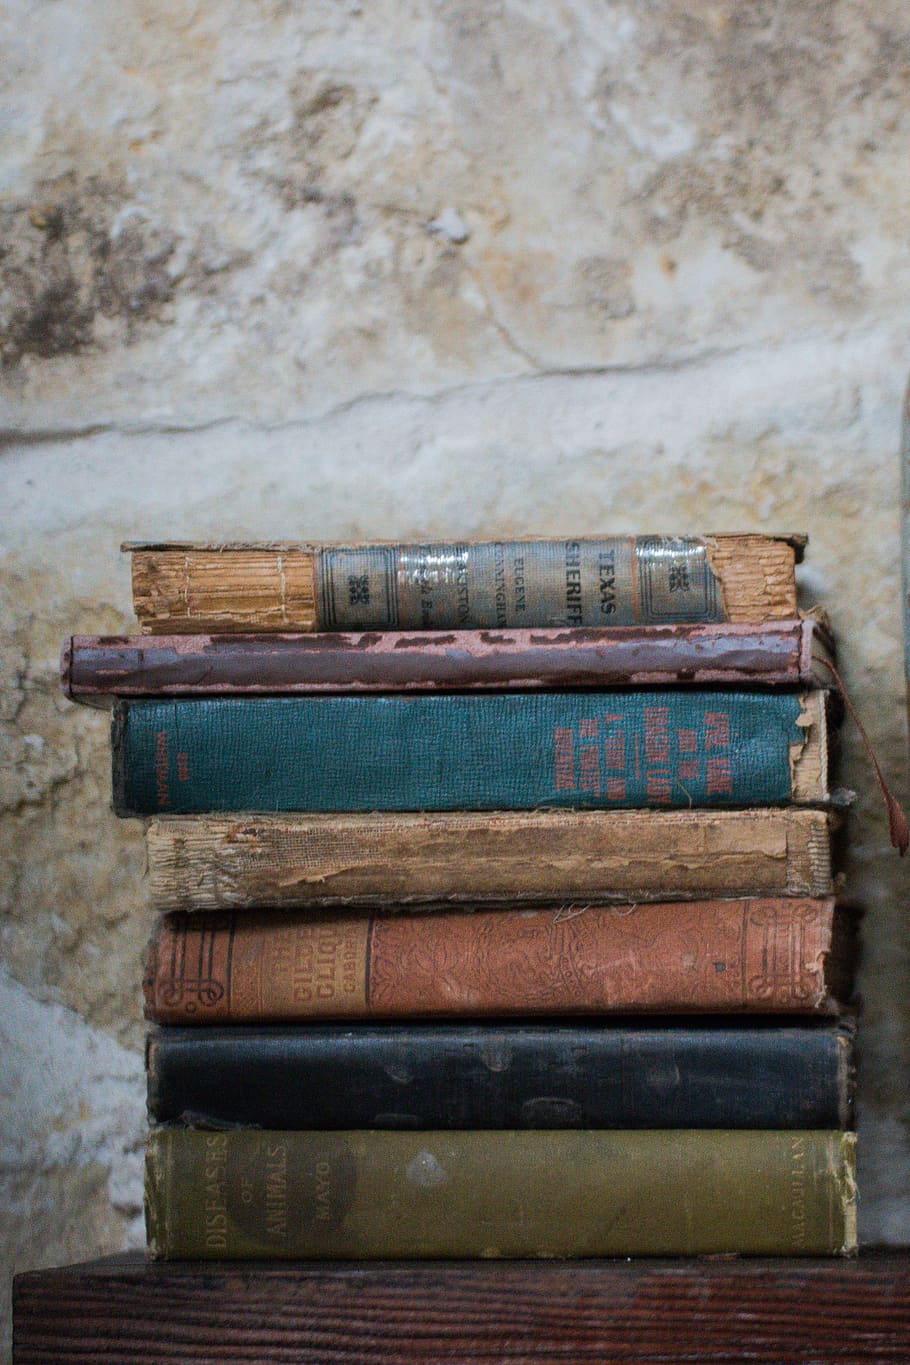 background image, old, decay, books, texture, vintage, paper, decorative, iphone wallpaper, stack